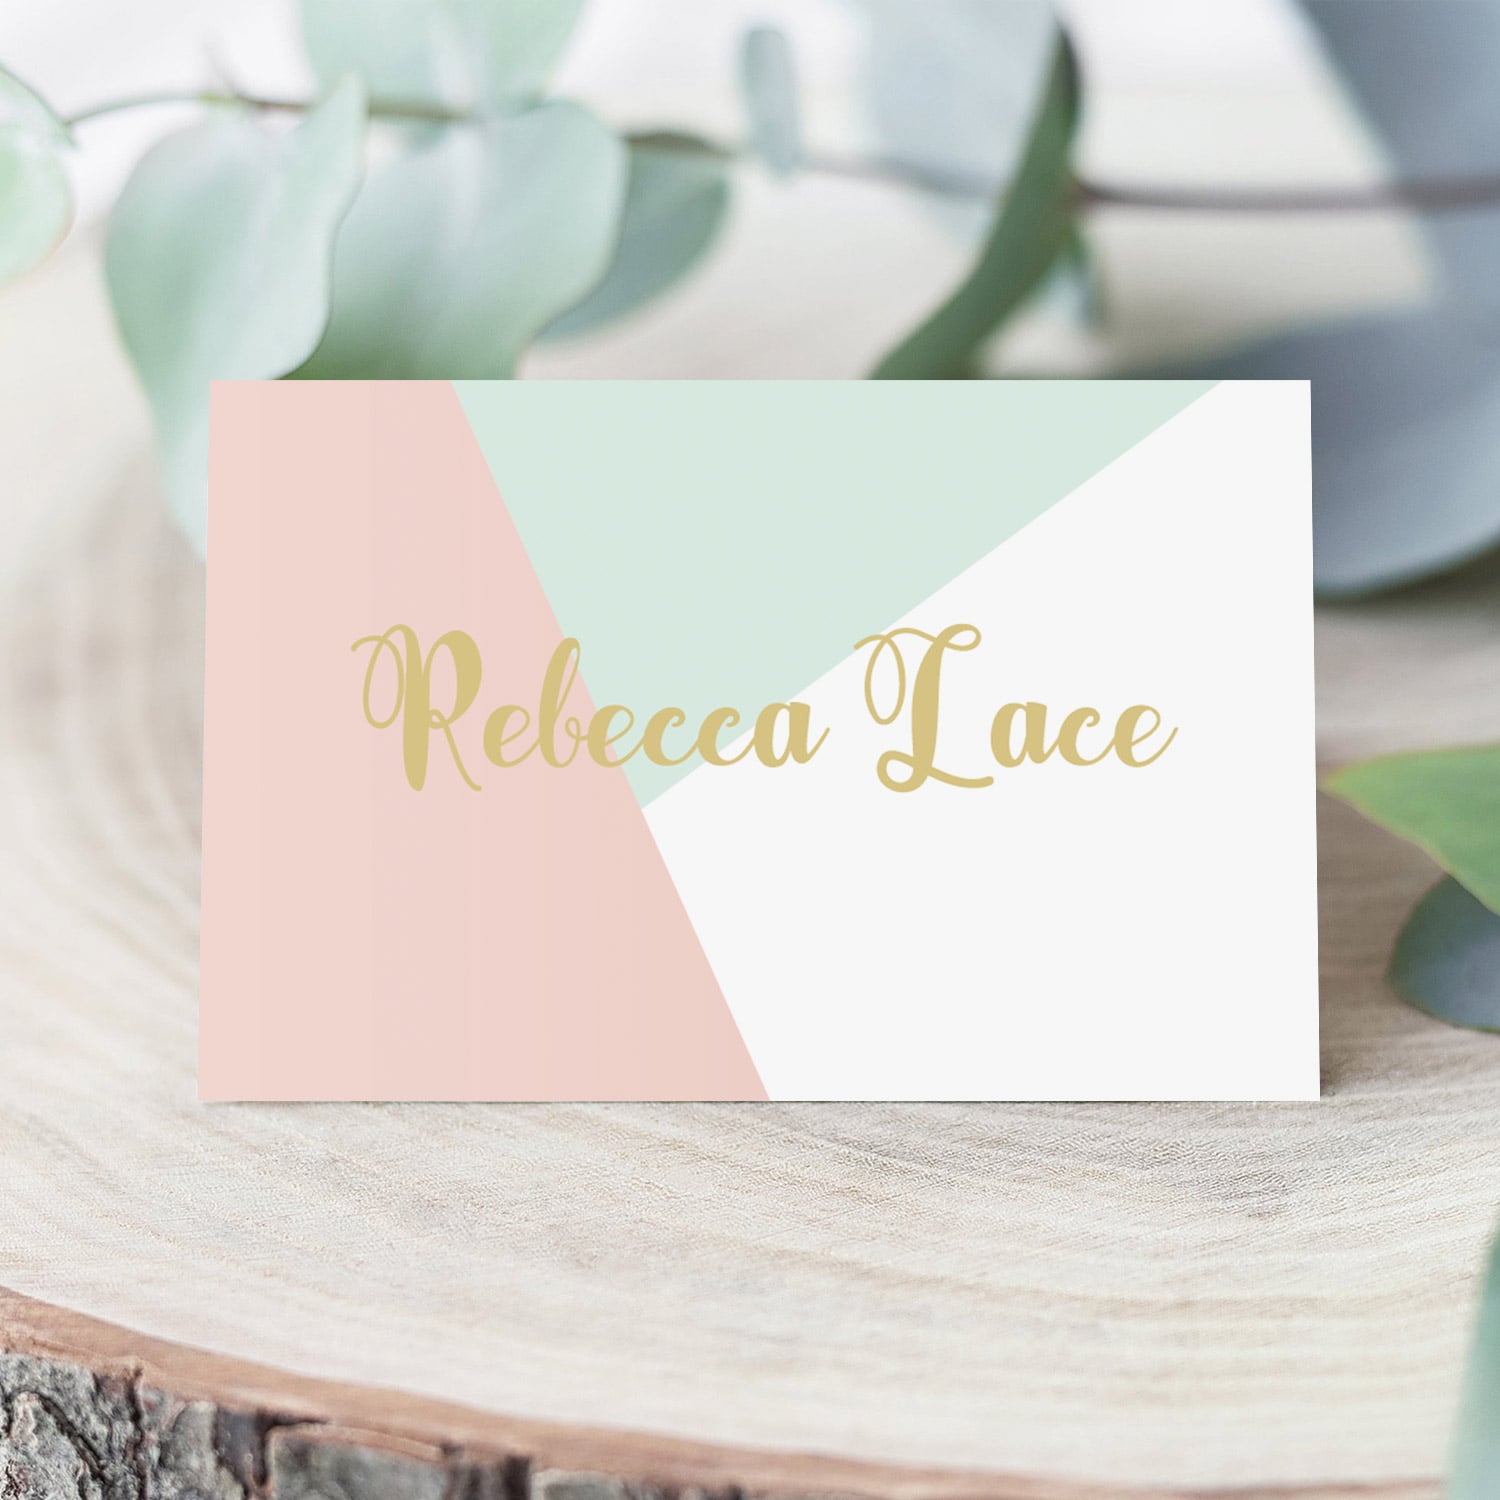 Pink and Mint Place Cards for Baby Shower by LittleSizzle